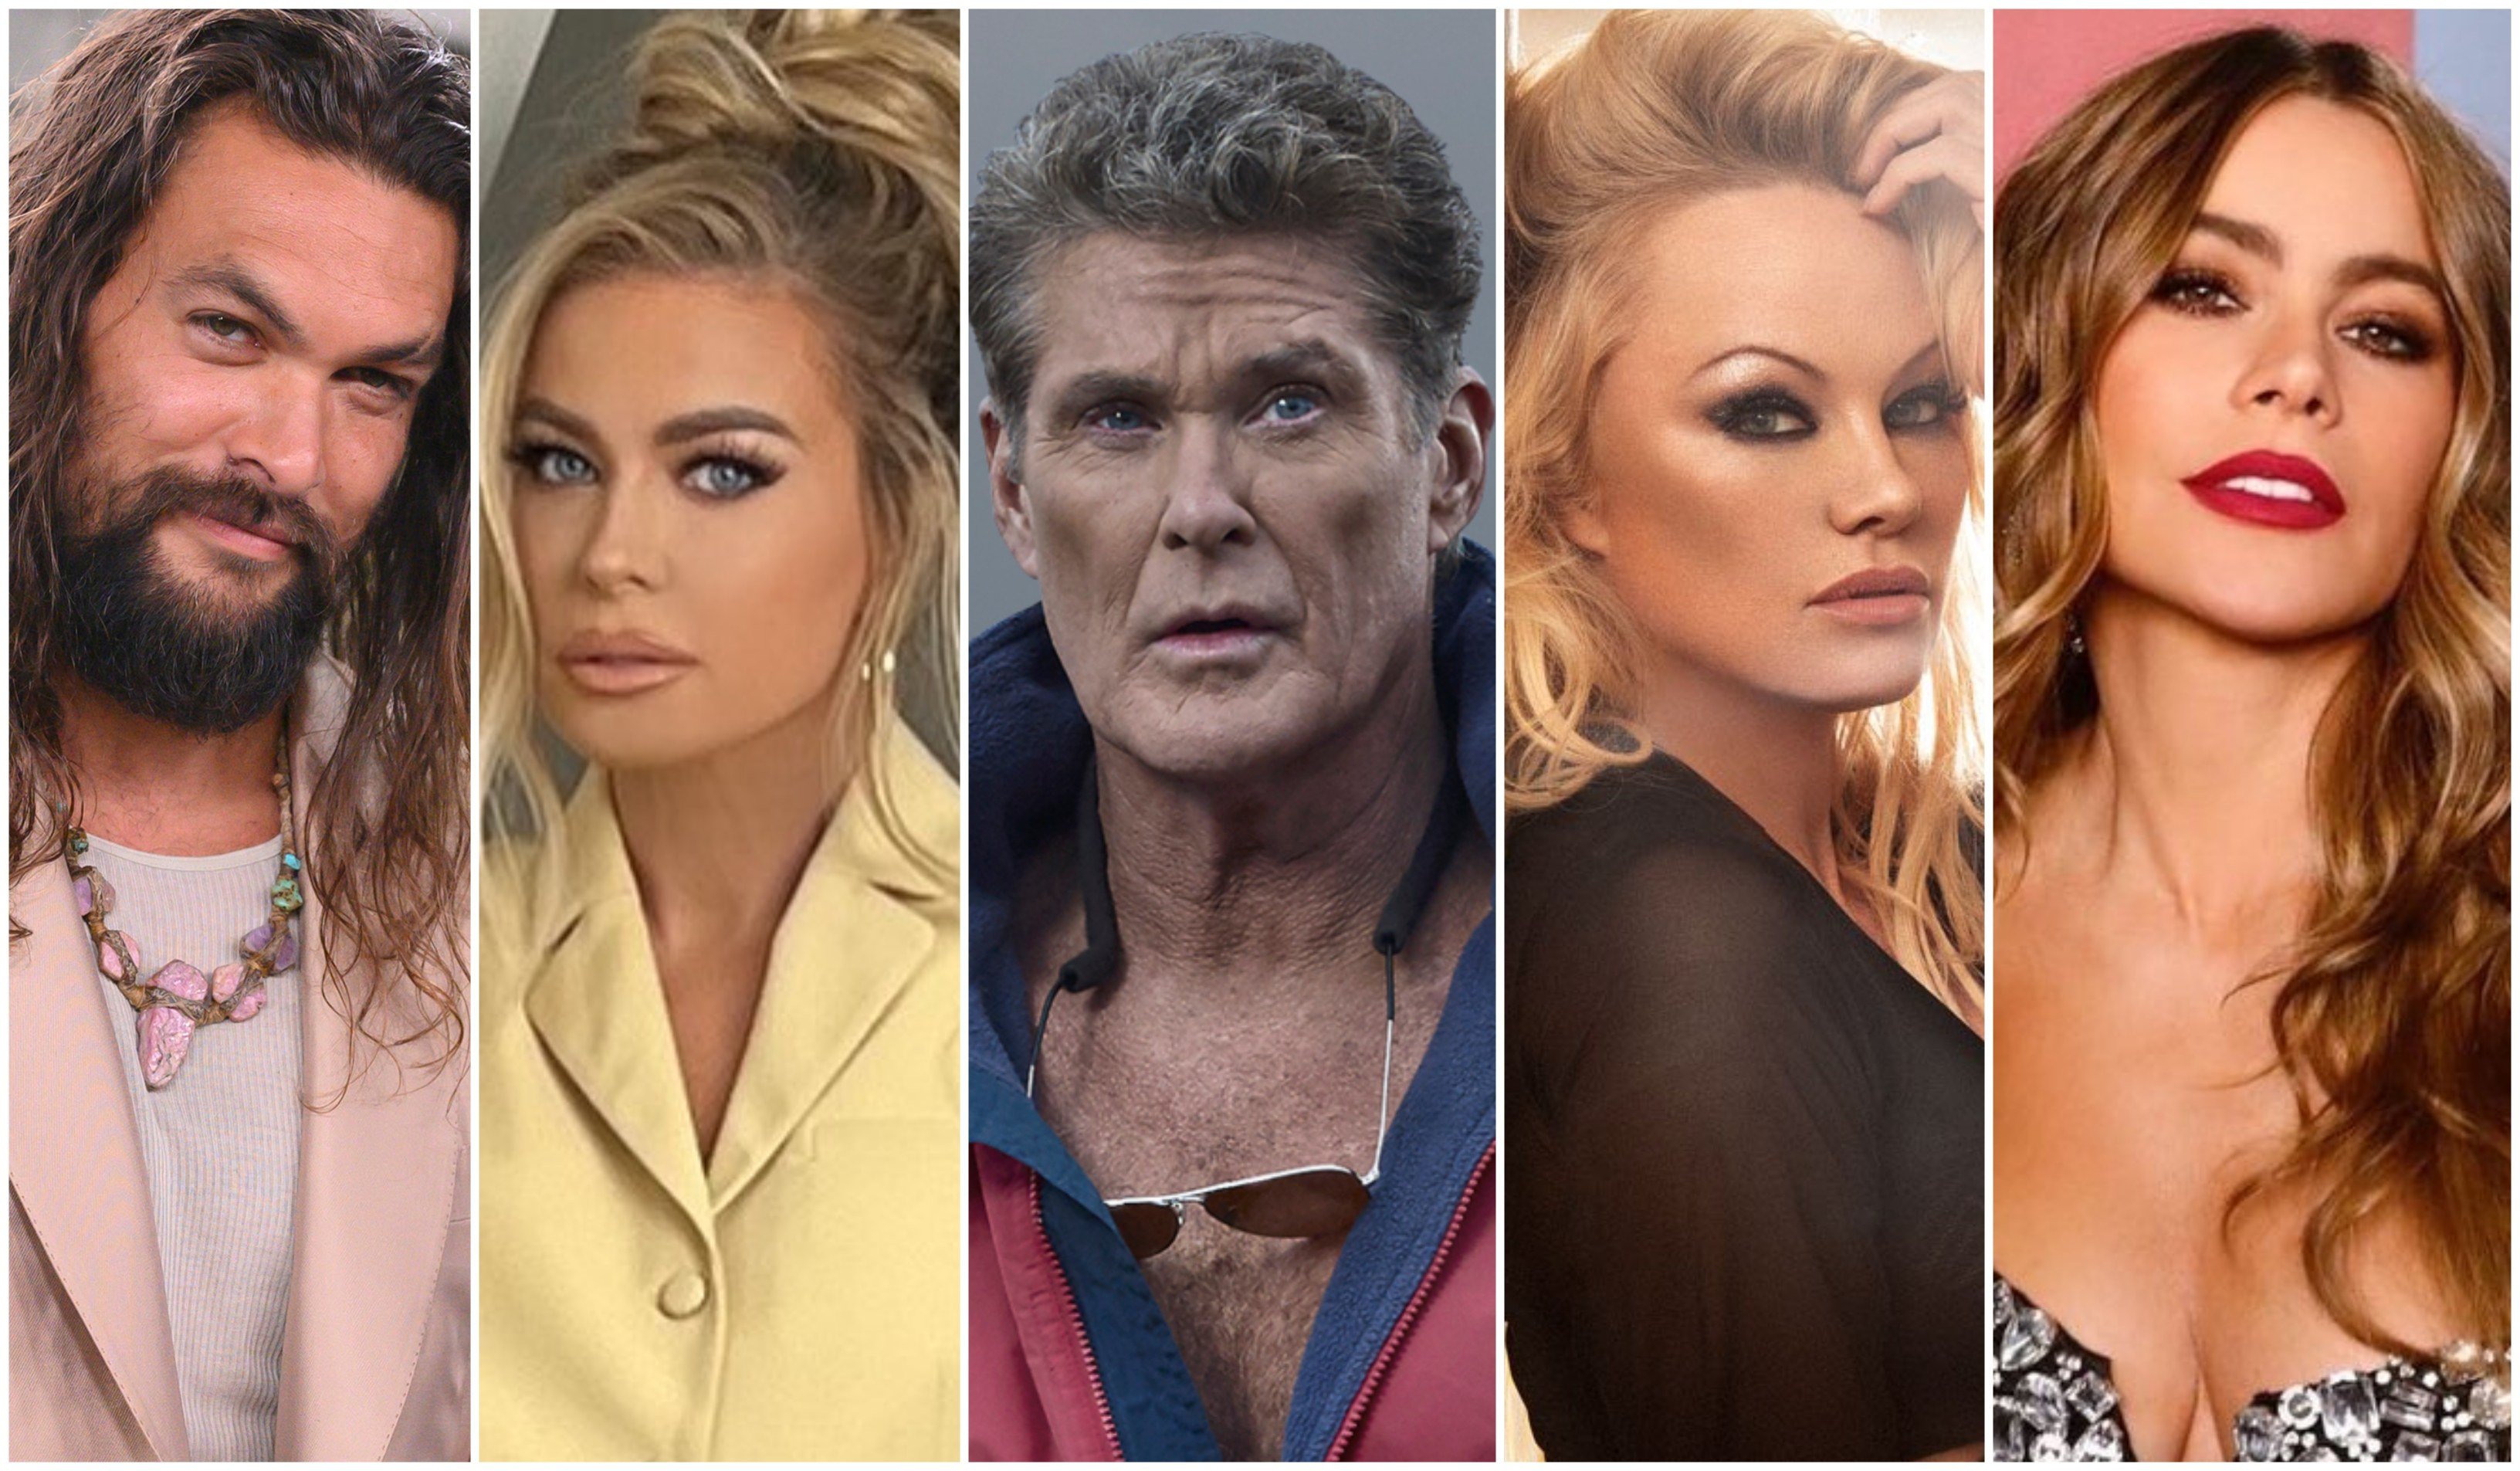 Sofía Vergara, David Hasselhoff, Pamela Anderson, Jason Momoa and Carmen Electra remained in the limelight after Baywatch, but who’s the richest now? Photos: @sofiavergara/Instagram, Getty Images, @pamelaanderson/Twitter, Handouts